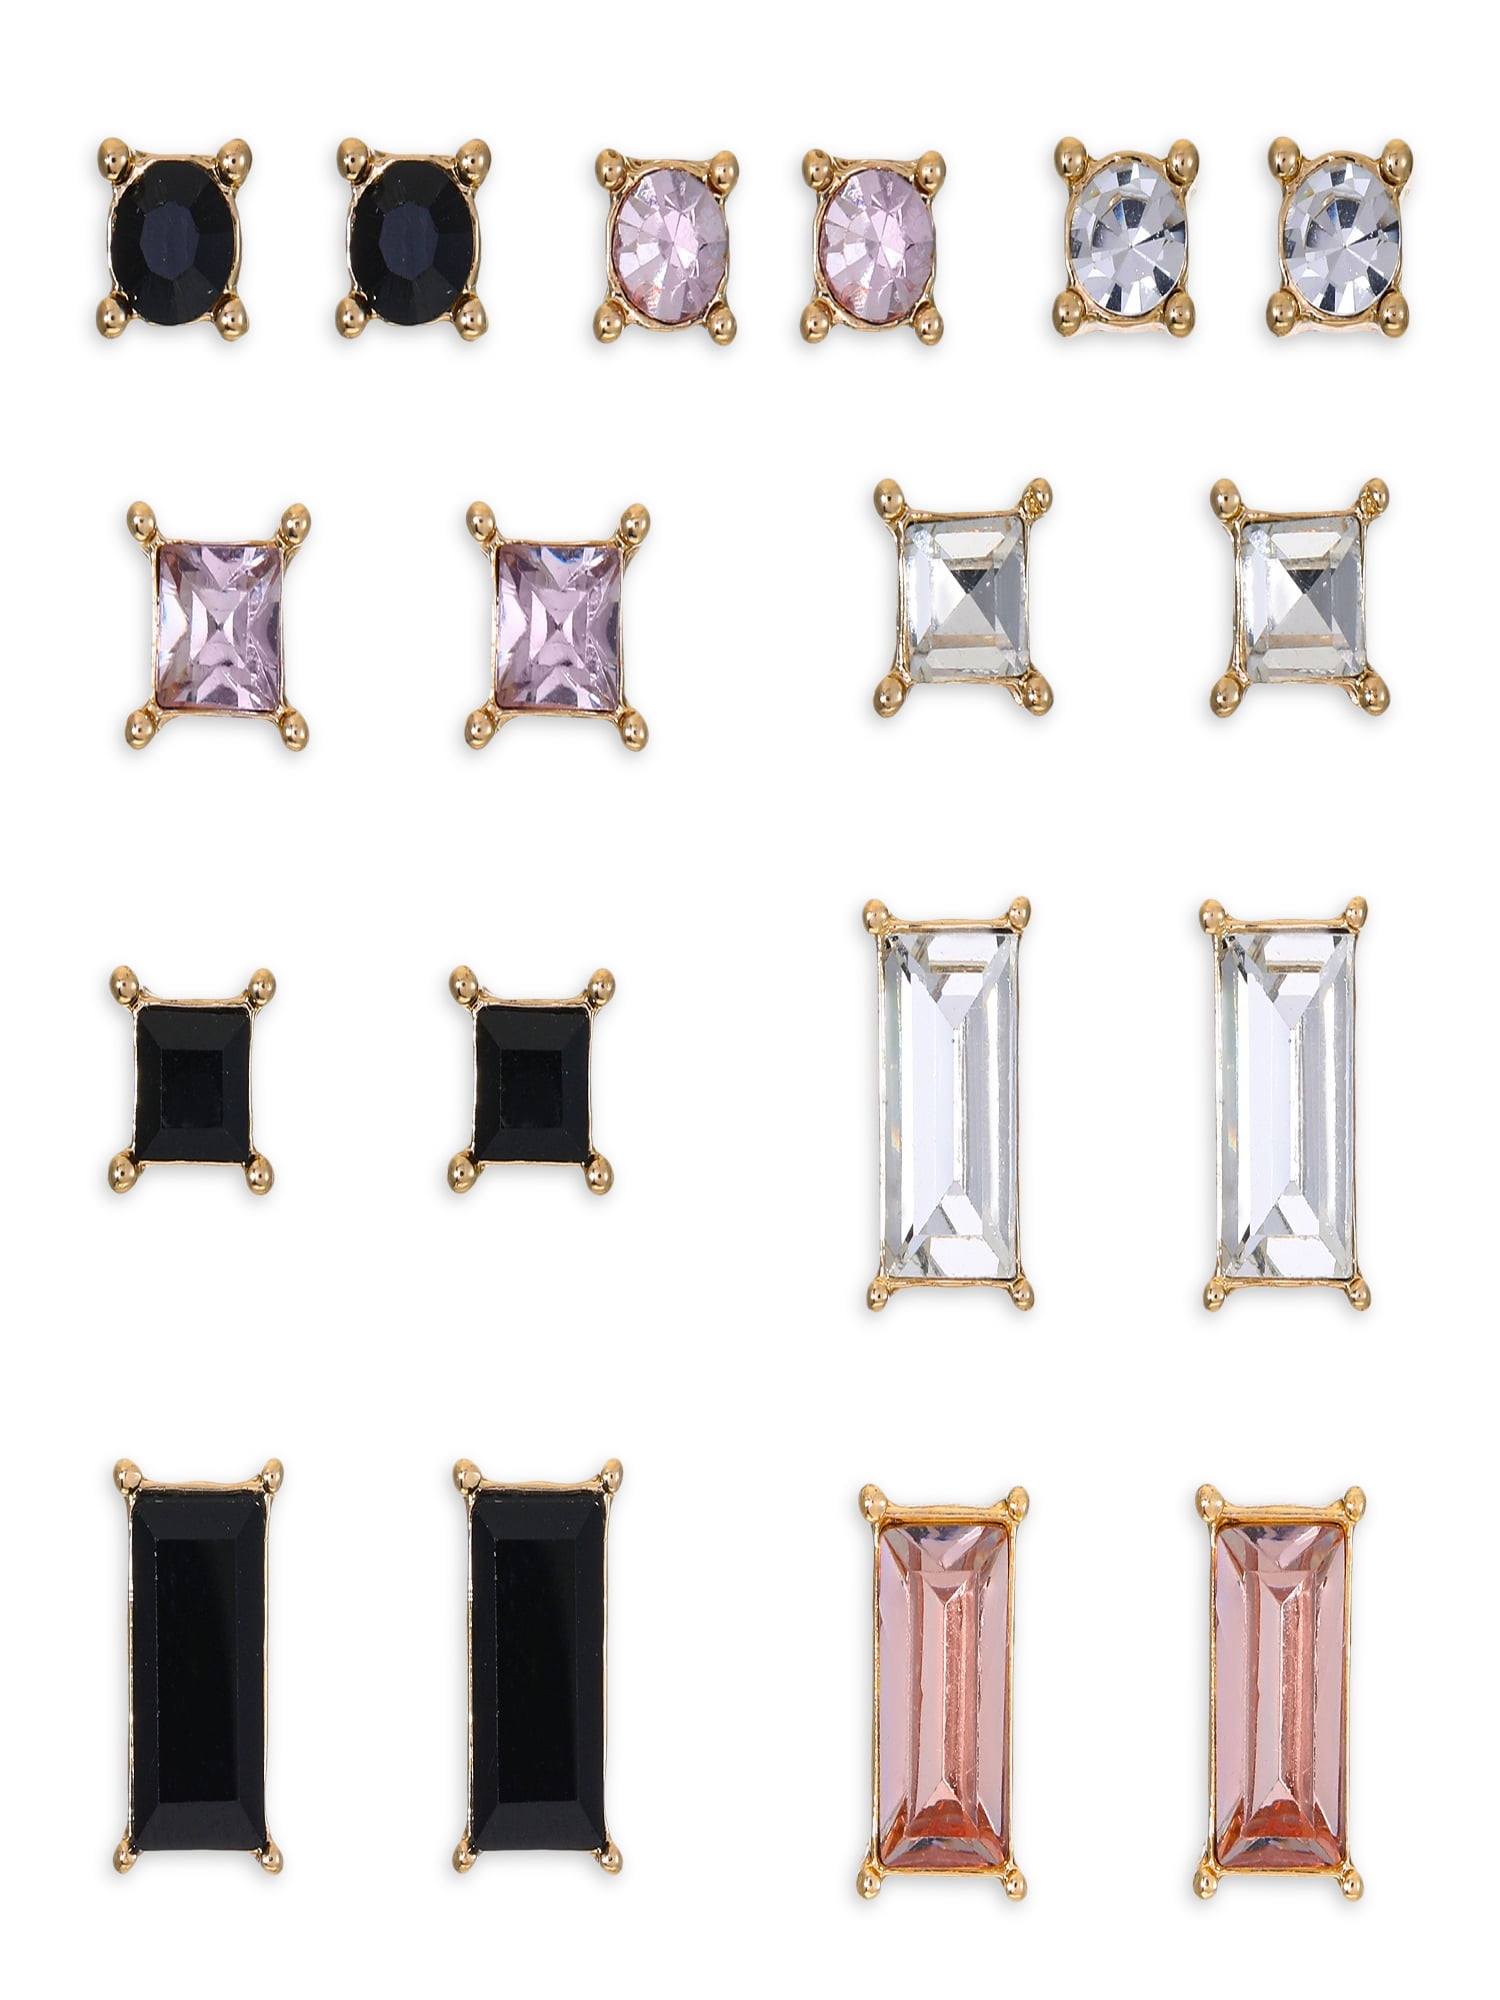 Women's Jewelry Stud Earring Collection, 9 Pairs